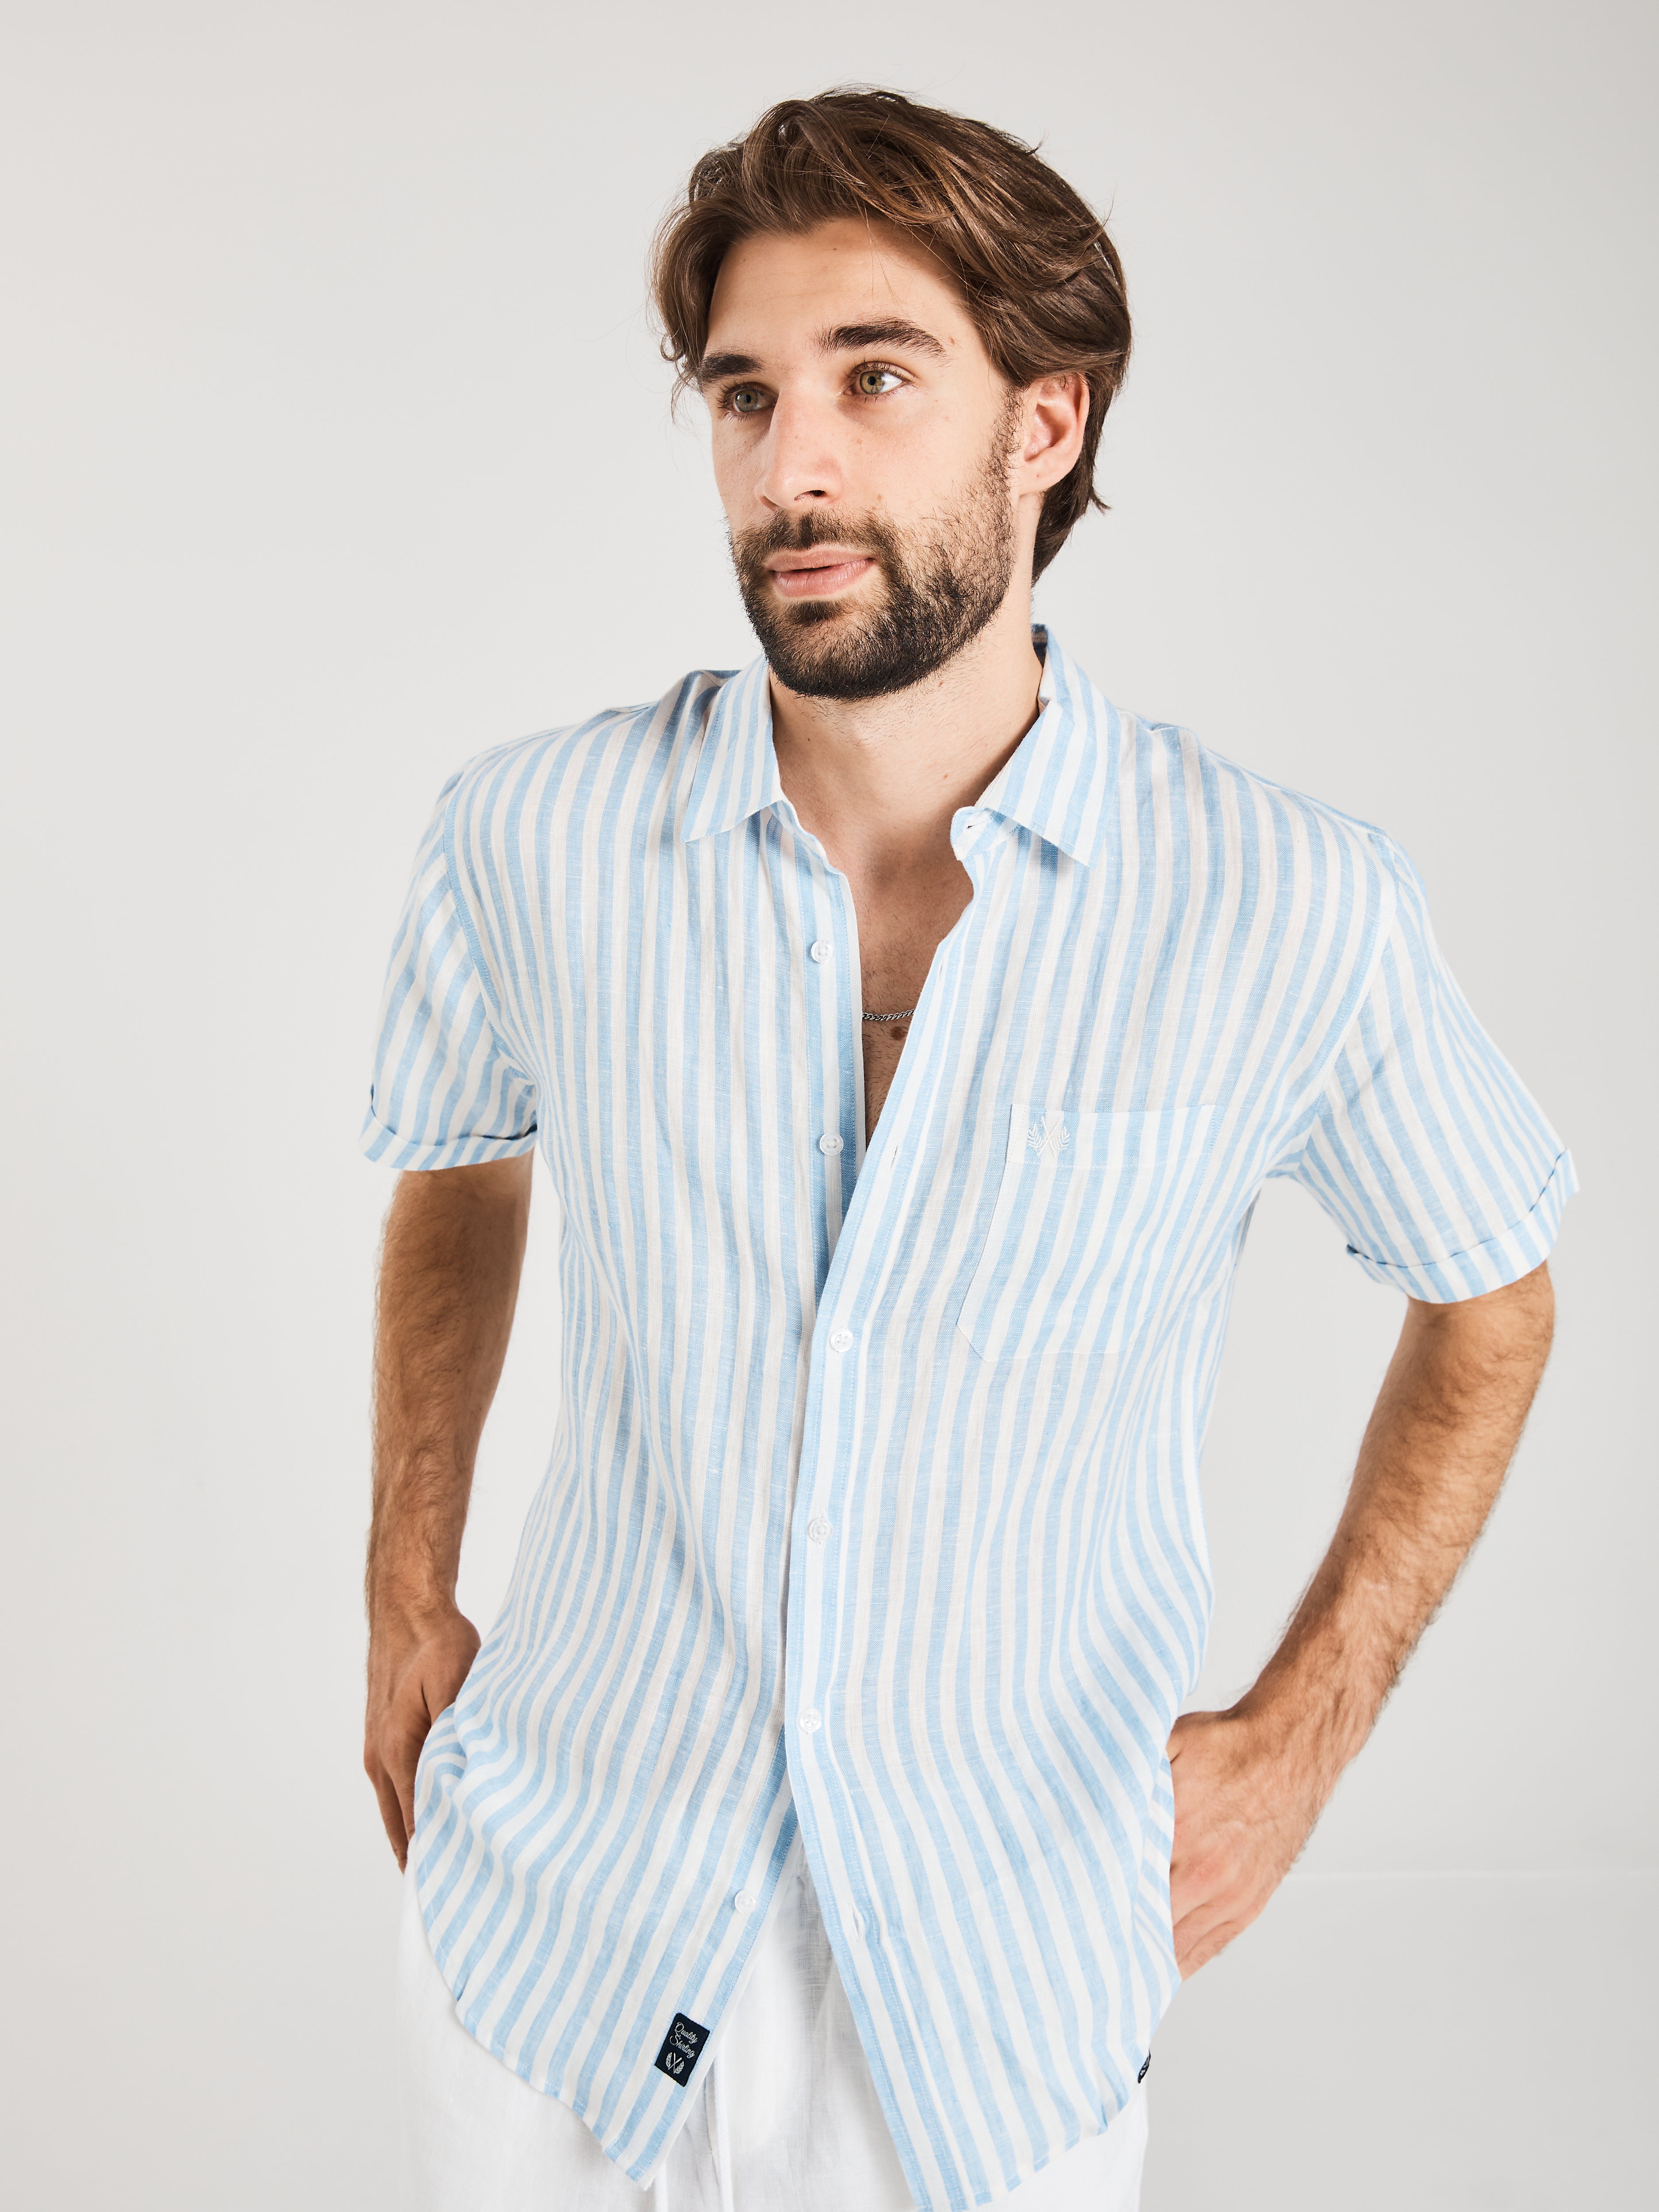 Benefits of Linen Clothing: Top Reasons to Wear It